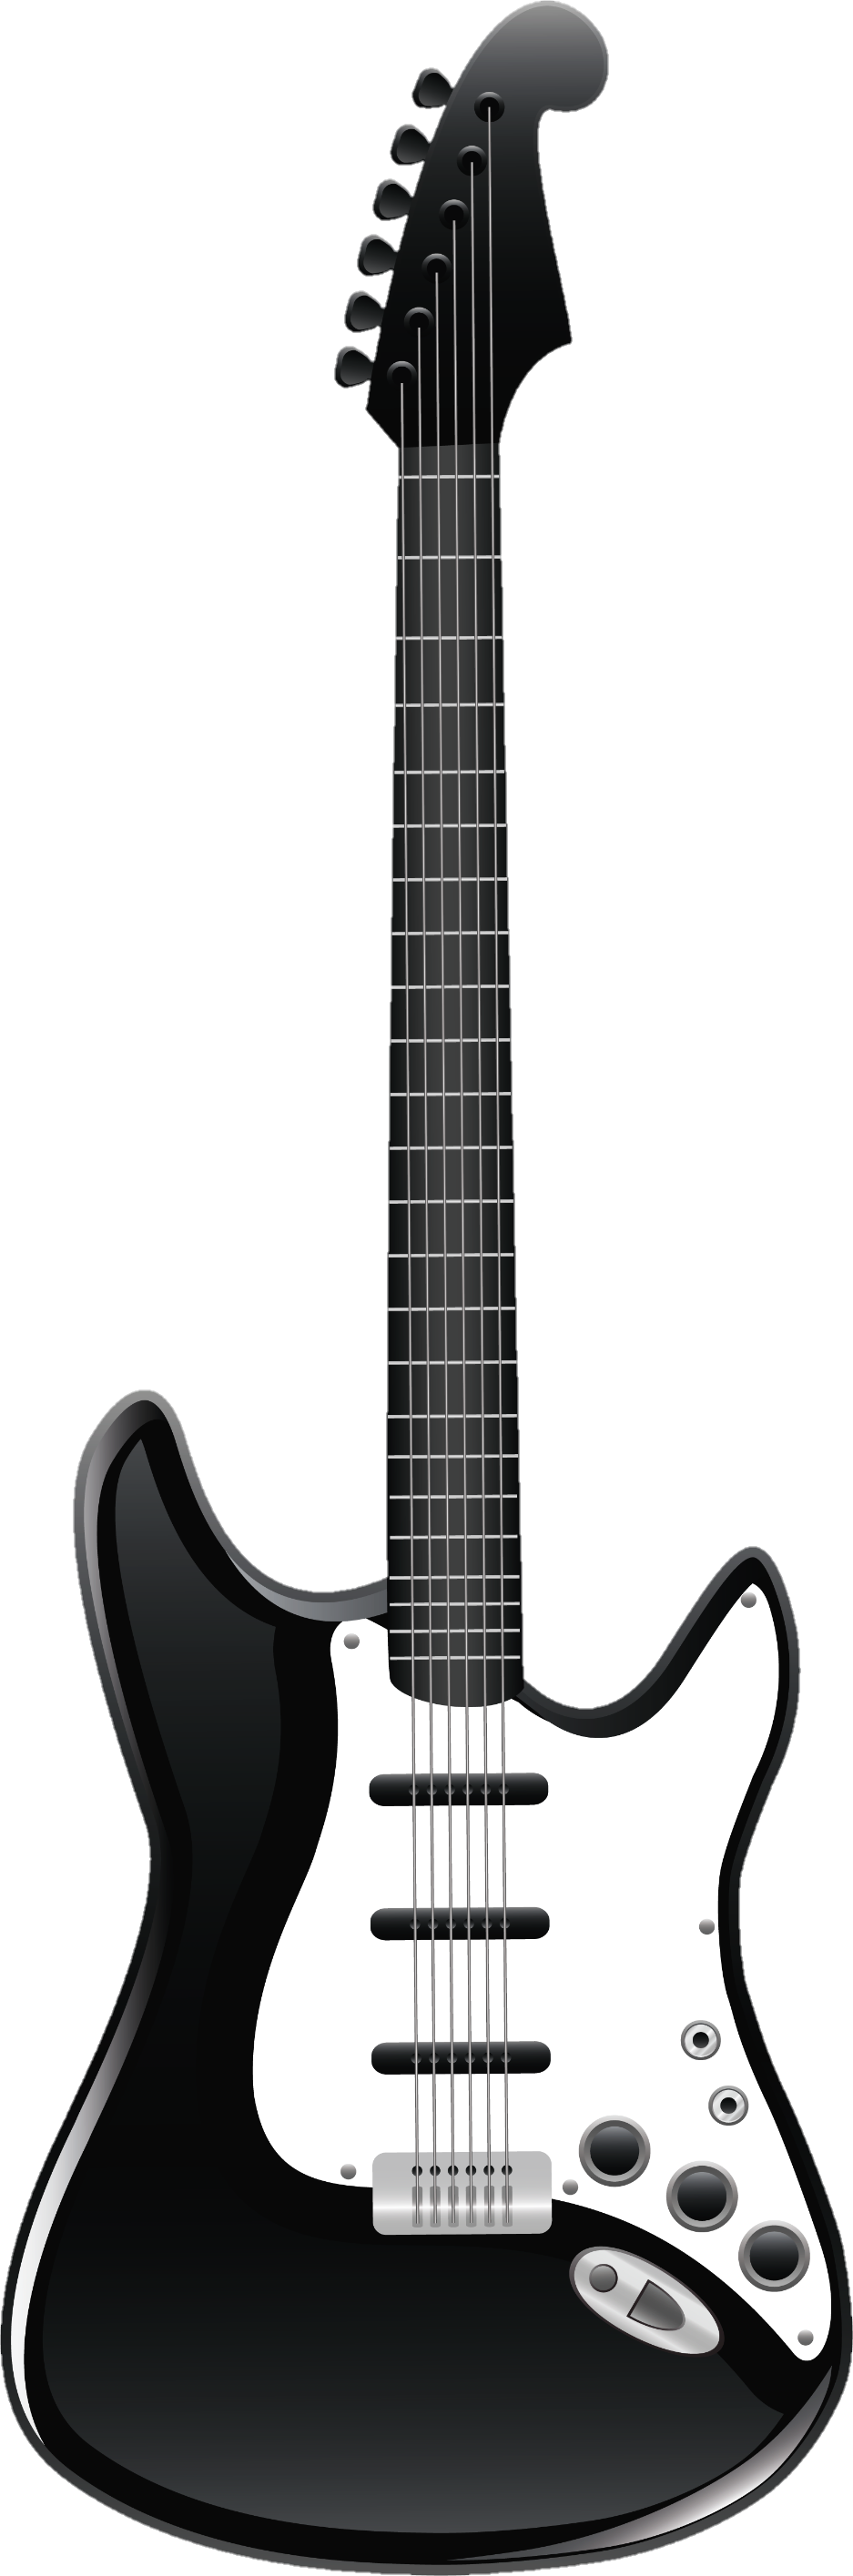 guitar-png-image-from-pngfre-13